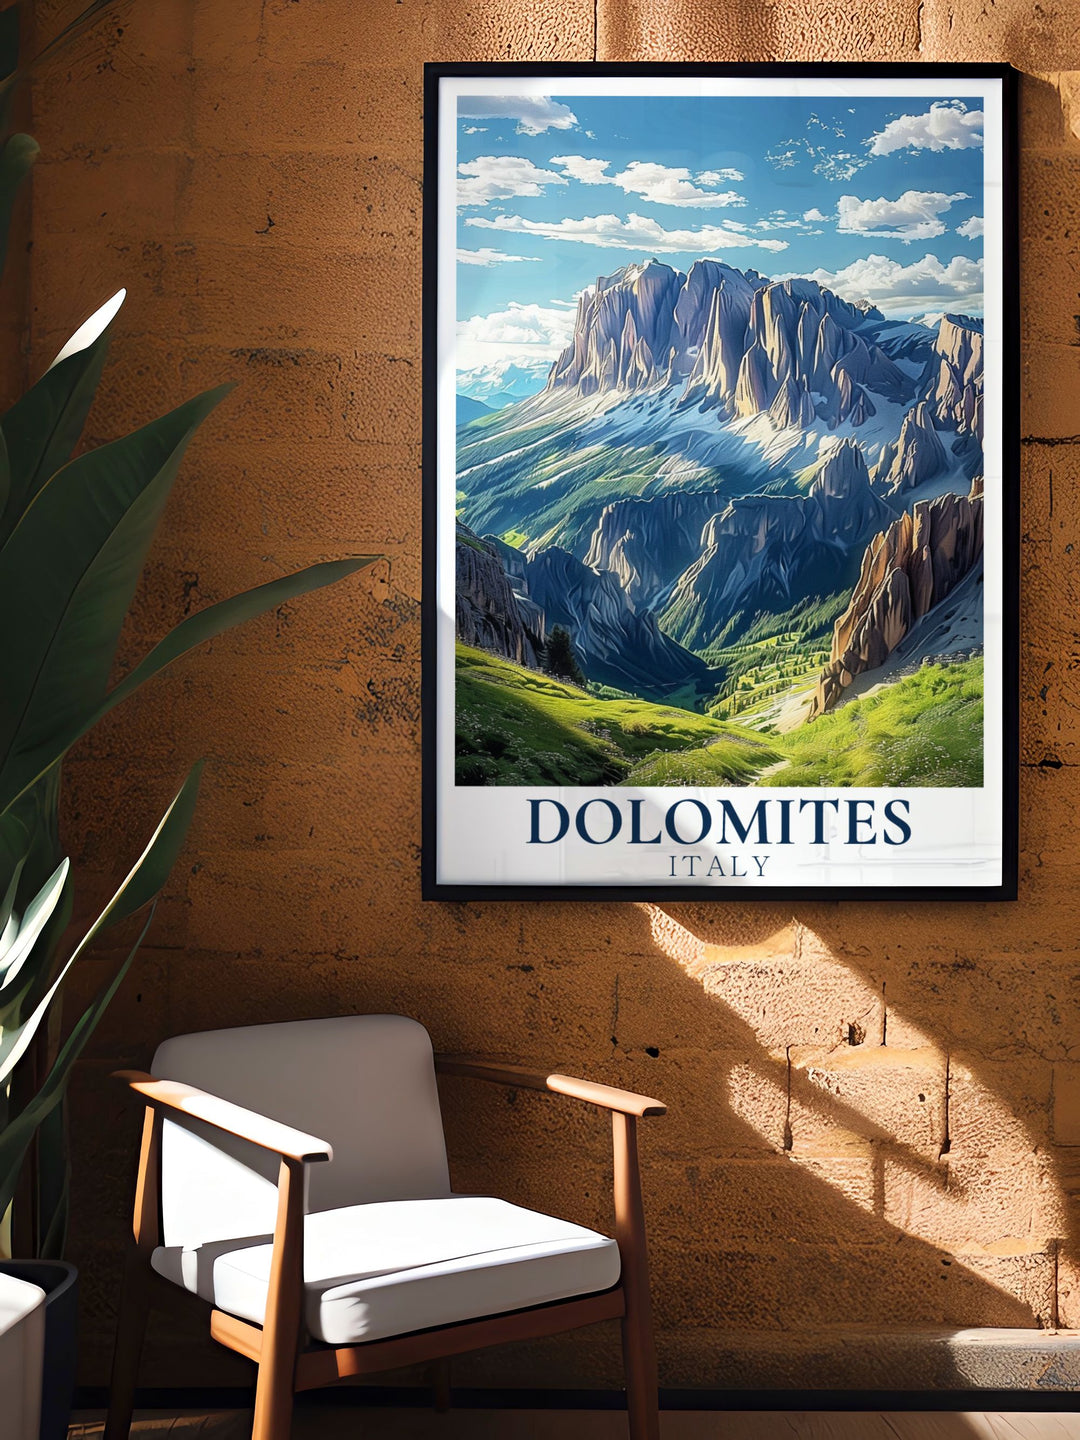 Elegant Sella Group Artwork featuring the dramatic beauty of the Italy mountains. This Italy travel print is a wonderful addition to your home decor. Celebrate the natural splendor of the Dolomites Italy with this stunning wall art.